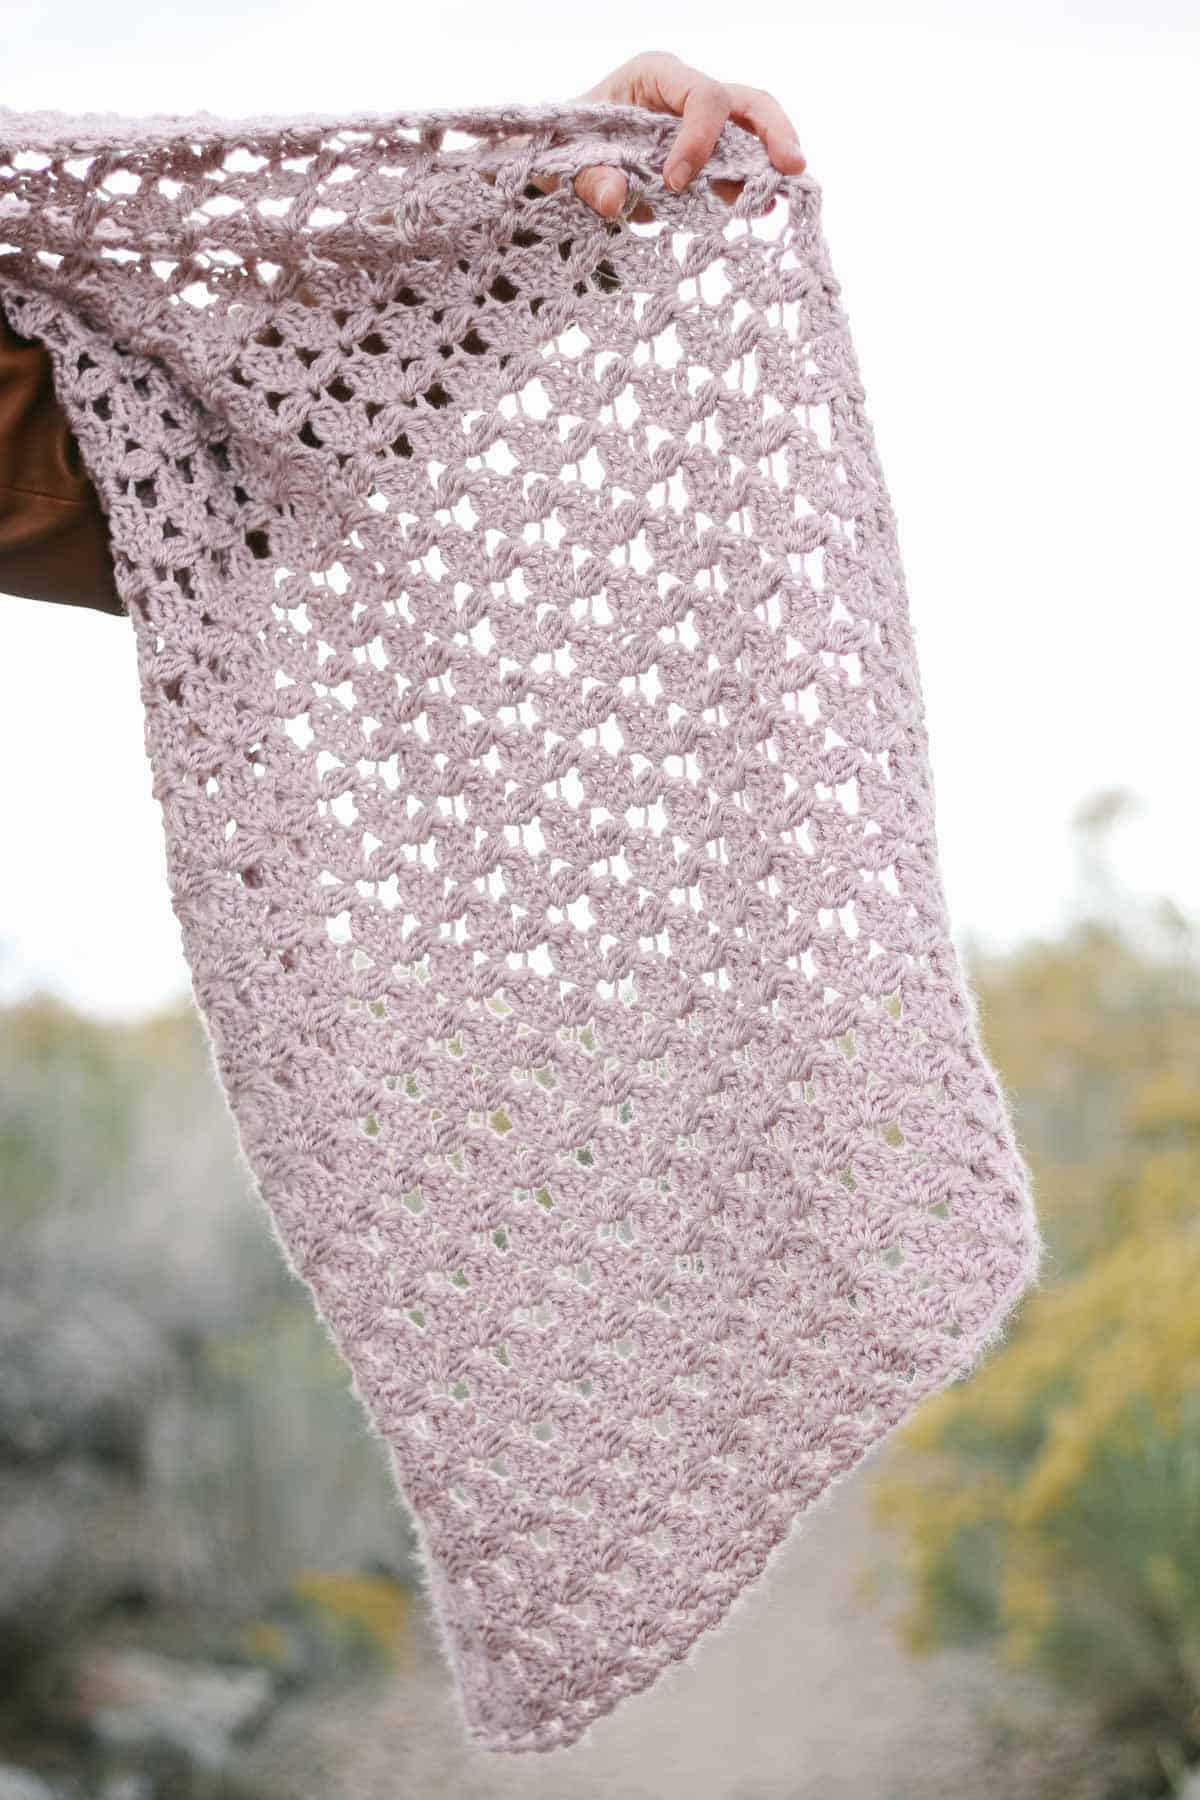 A woman's hand holding a crochet lace scarf.